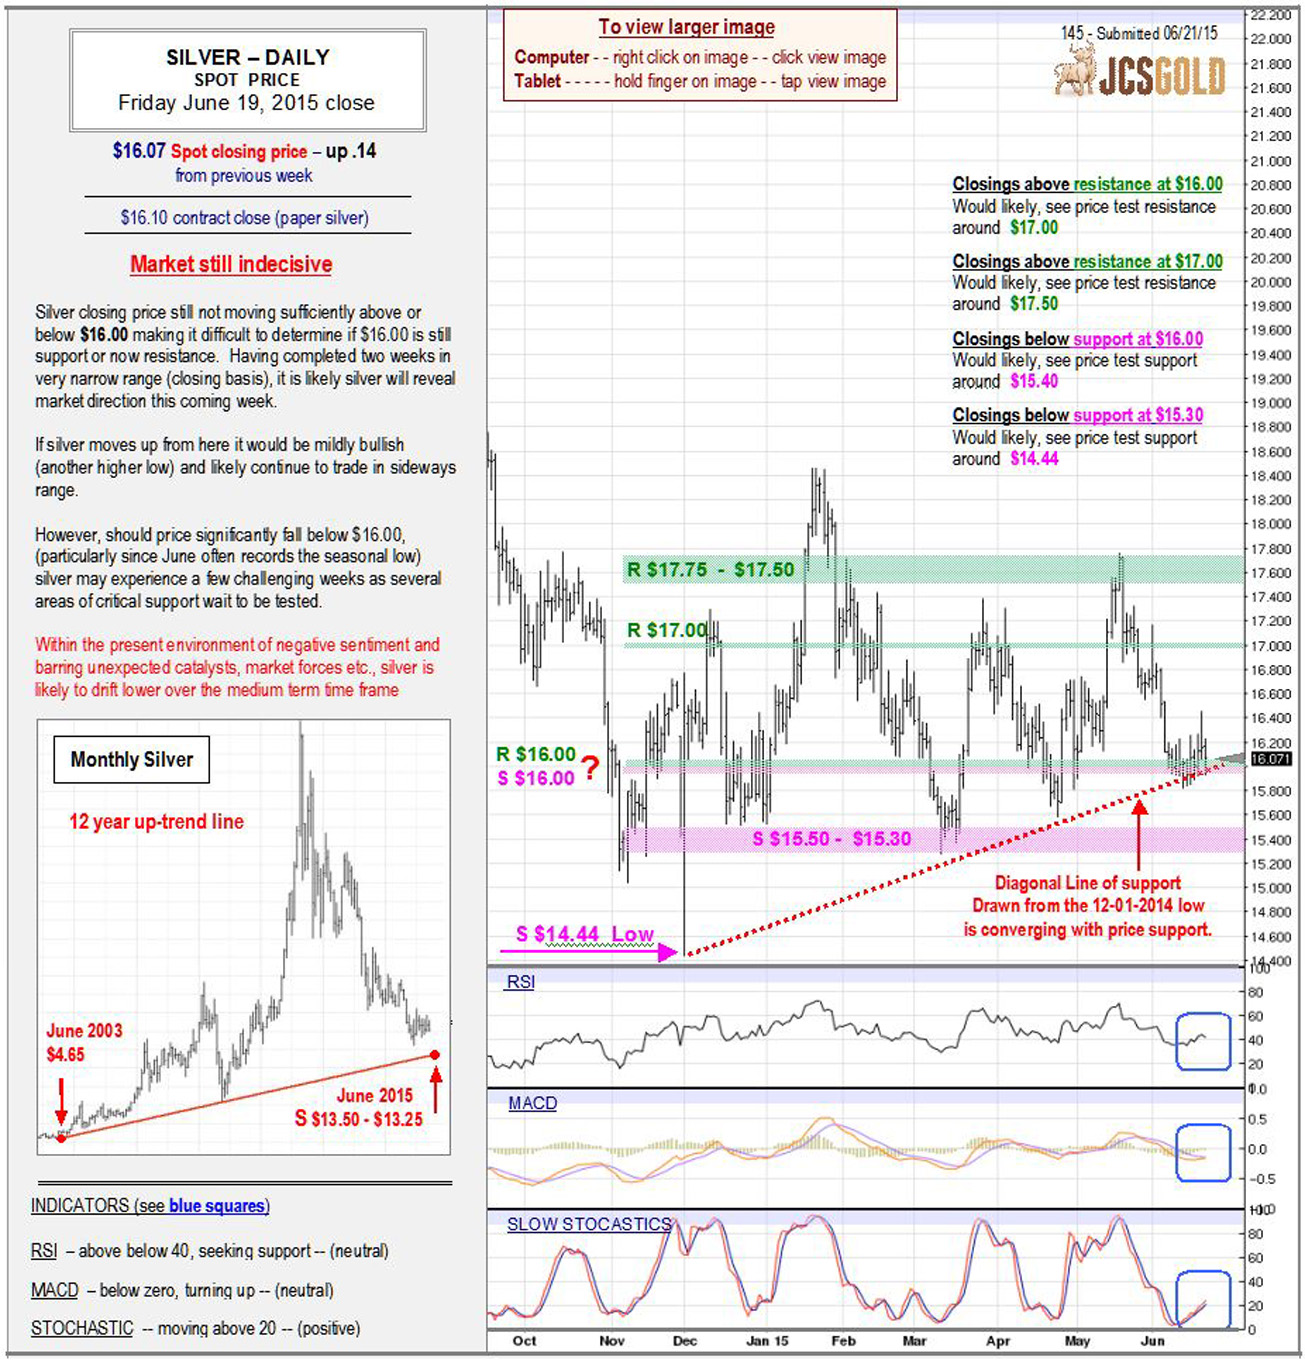 June 19, 2015 chart & commentary